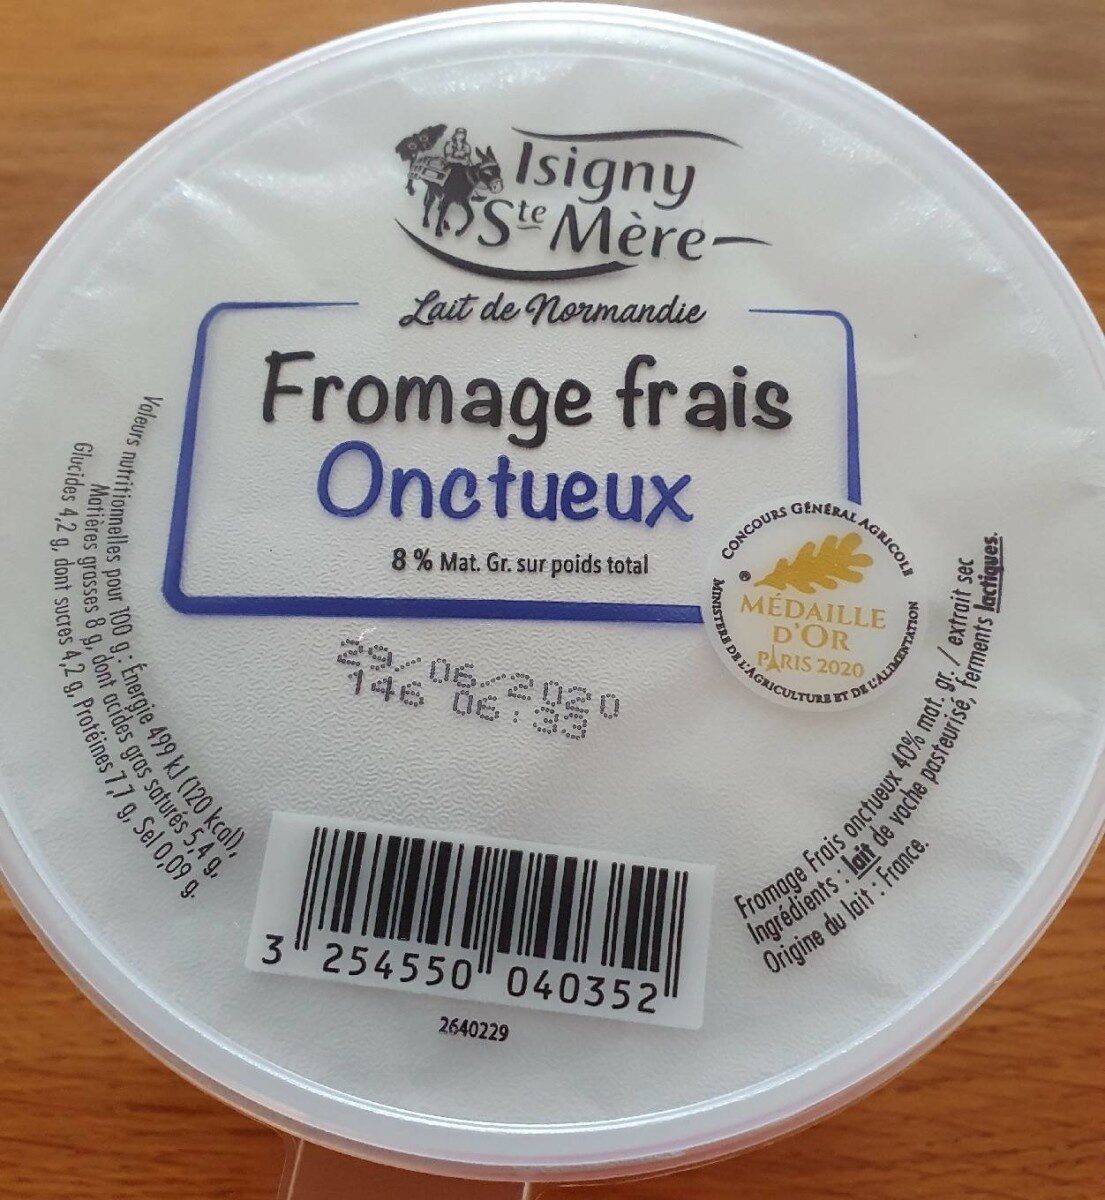 Fromage frais onctueux - Product - fr